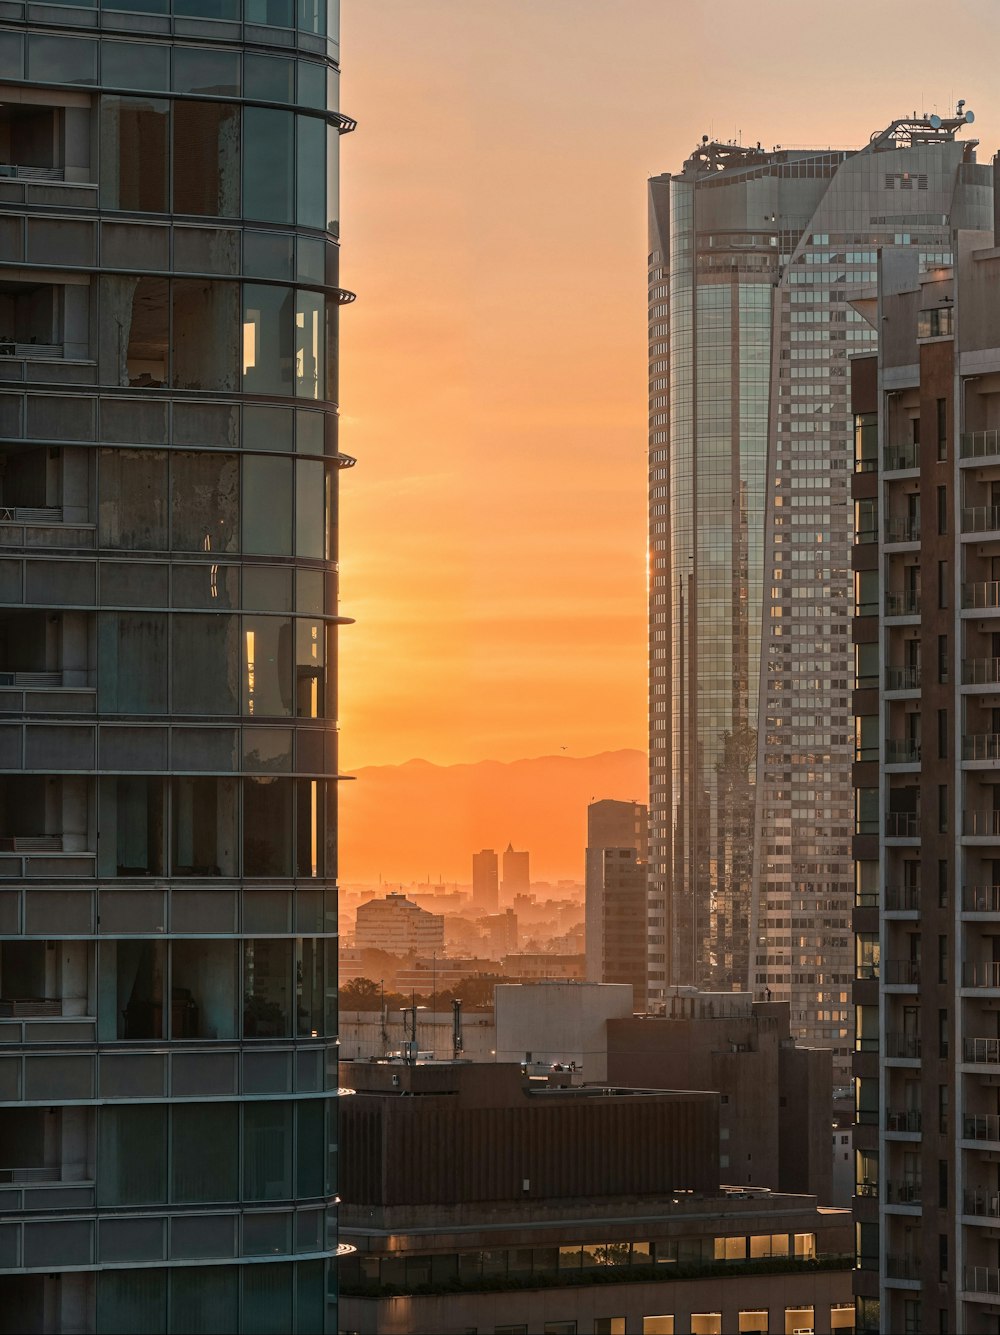 a view of a city at sunset from a high rise building